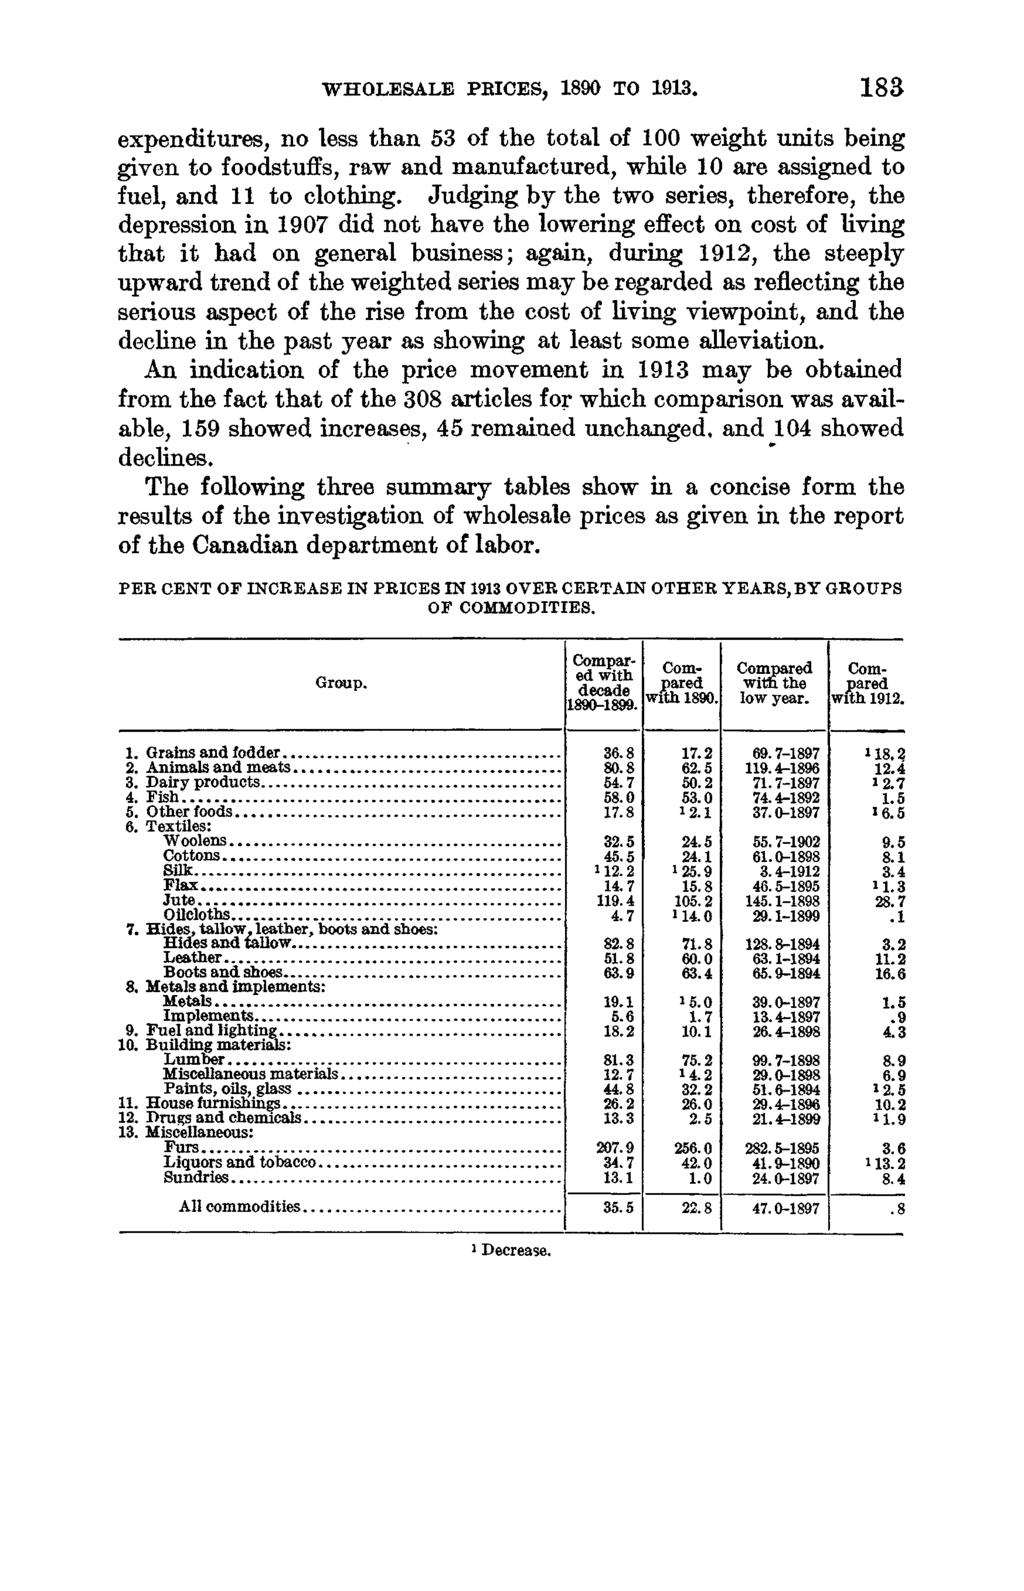 WHOLESALE PRICES, 1890 TO 1913. 1 8 3 expenditures, no less than 53 of the total of 100 weight units being given to foodstuffs, raw and manufactured, while 10 are assigned to fuel, and 11 to clothing.